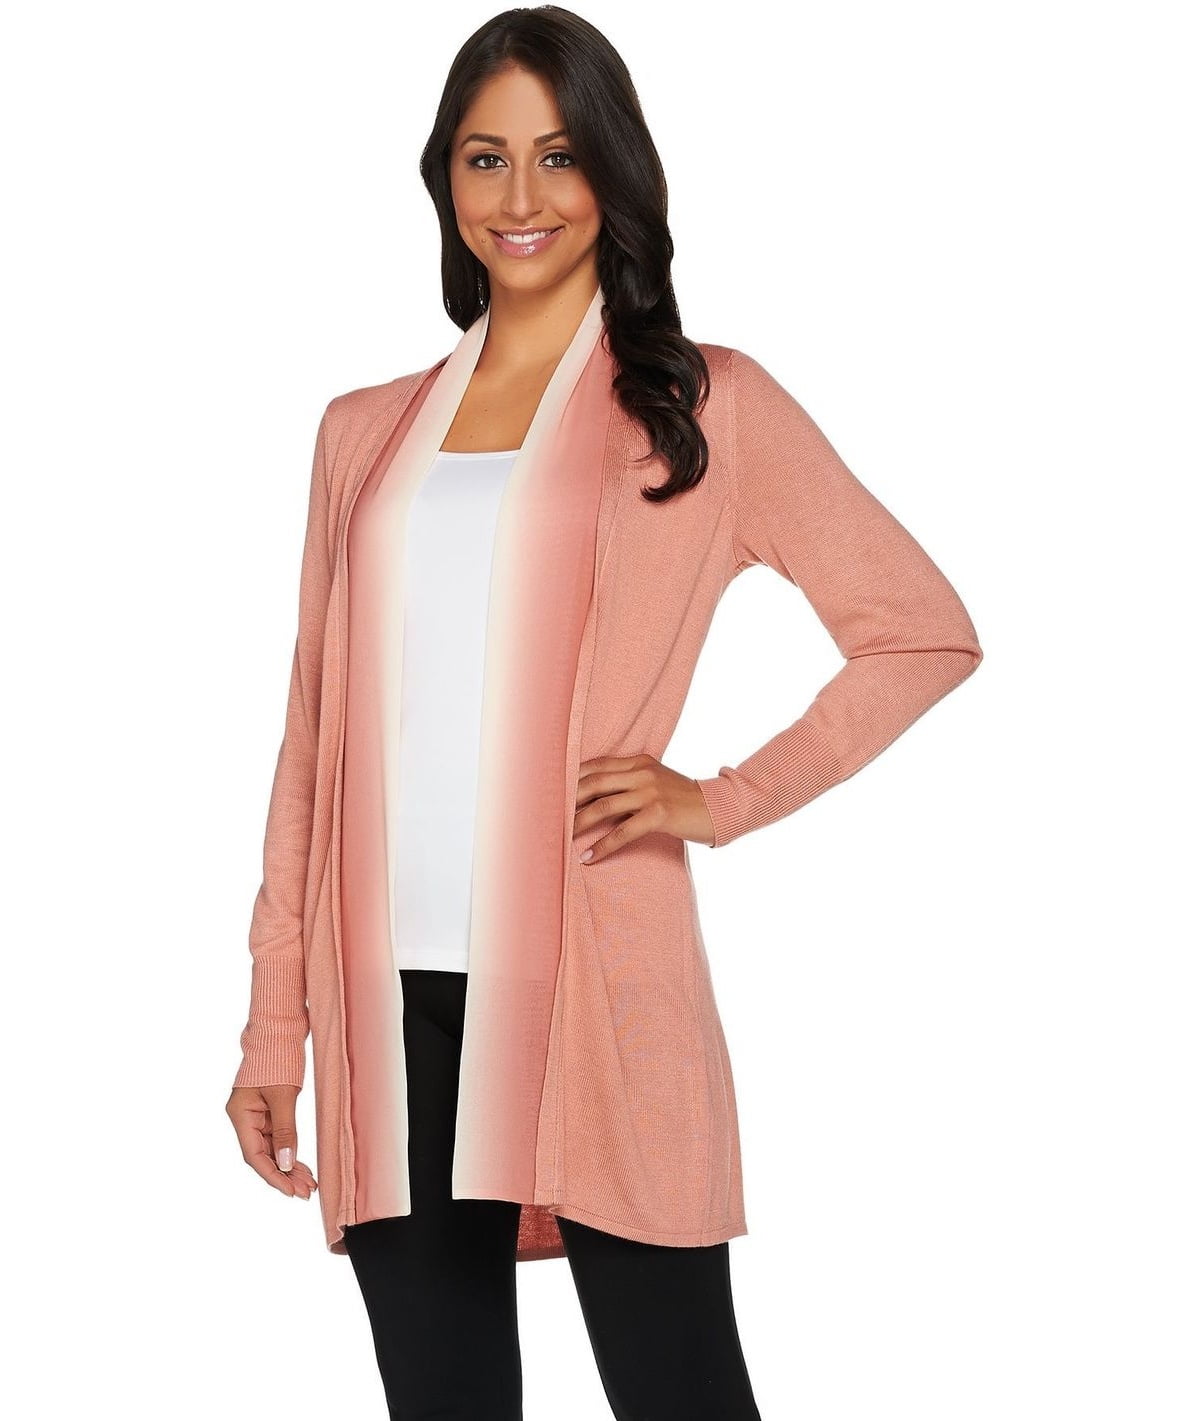 H by Halston - Halston Open Front Cardigan Ombre Chiffon Trim A278926 ...